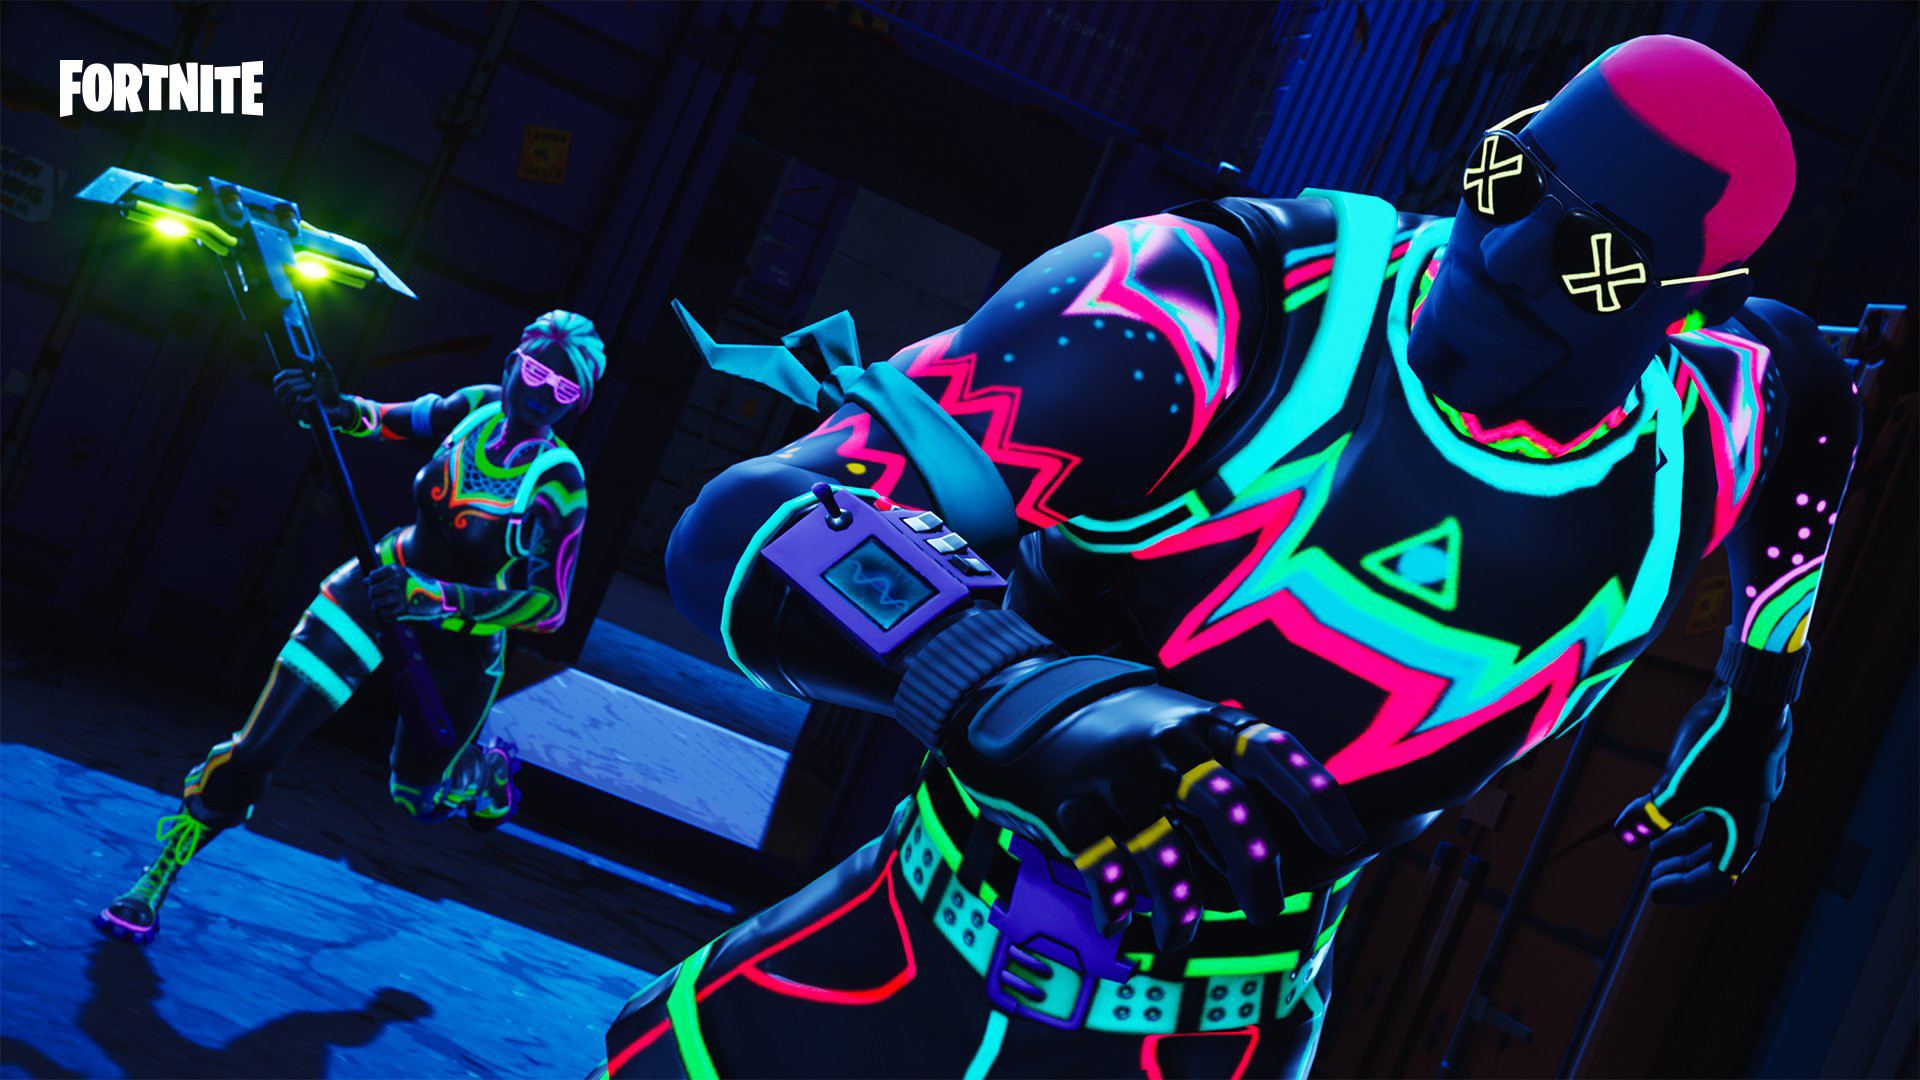 1920x1080 Fortnite Backgrounds Neon Black Lights - Image #4044 - Licence: Free for  Personal Use